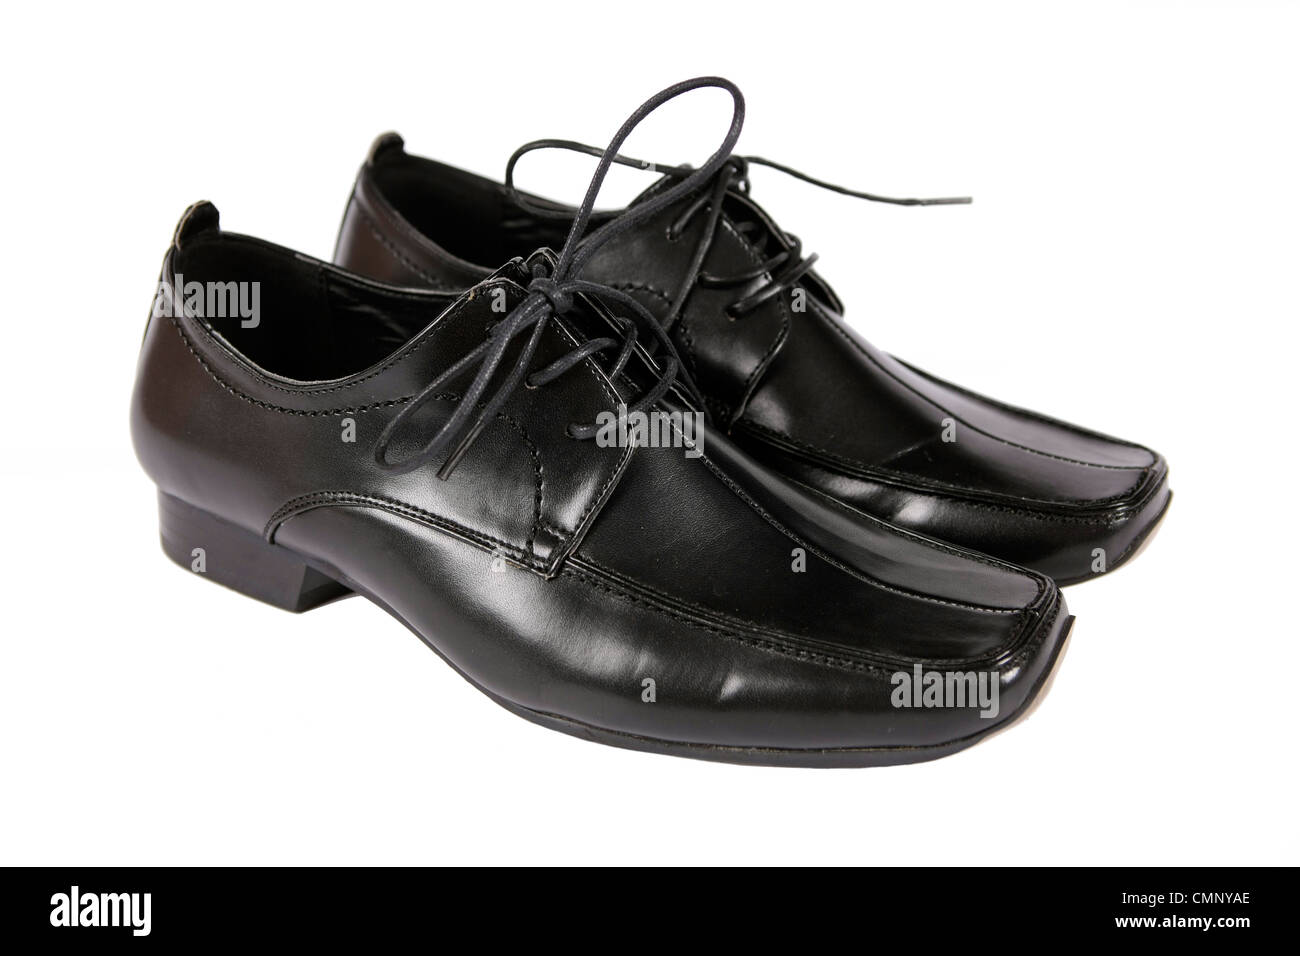 Fashionable men's leather shoes in vintage style. Stock Photo by  ©Devin_Pavel 60864221